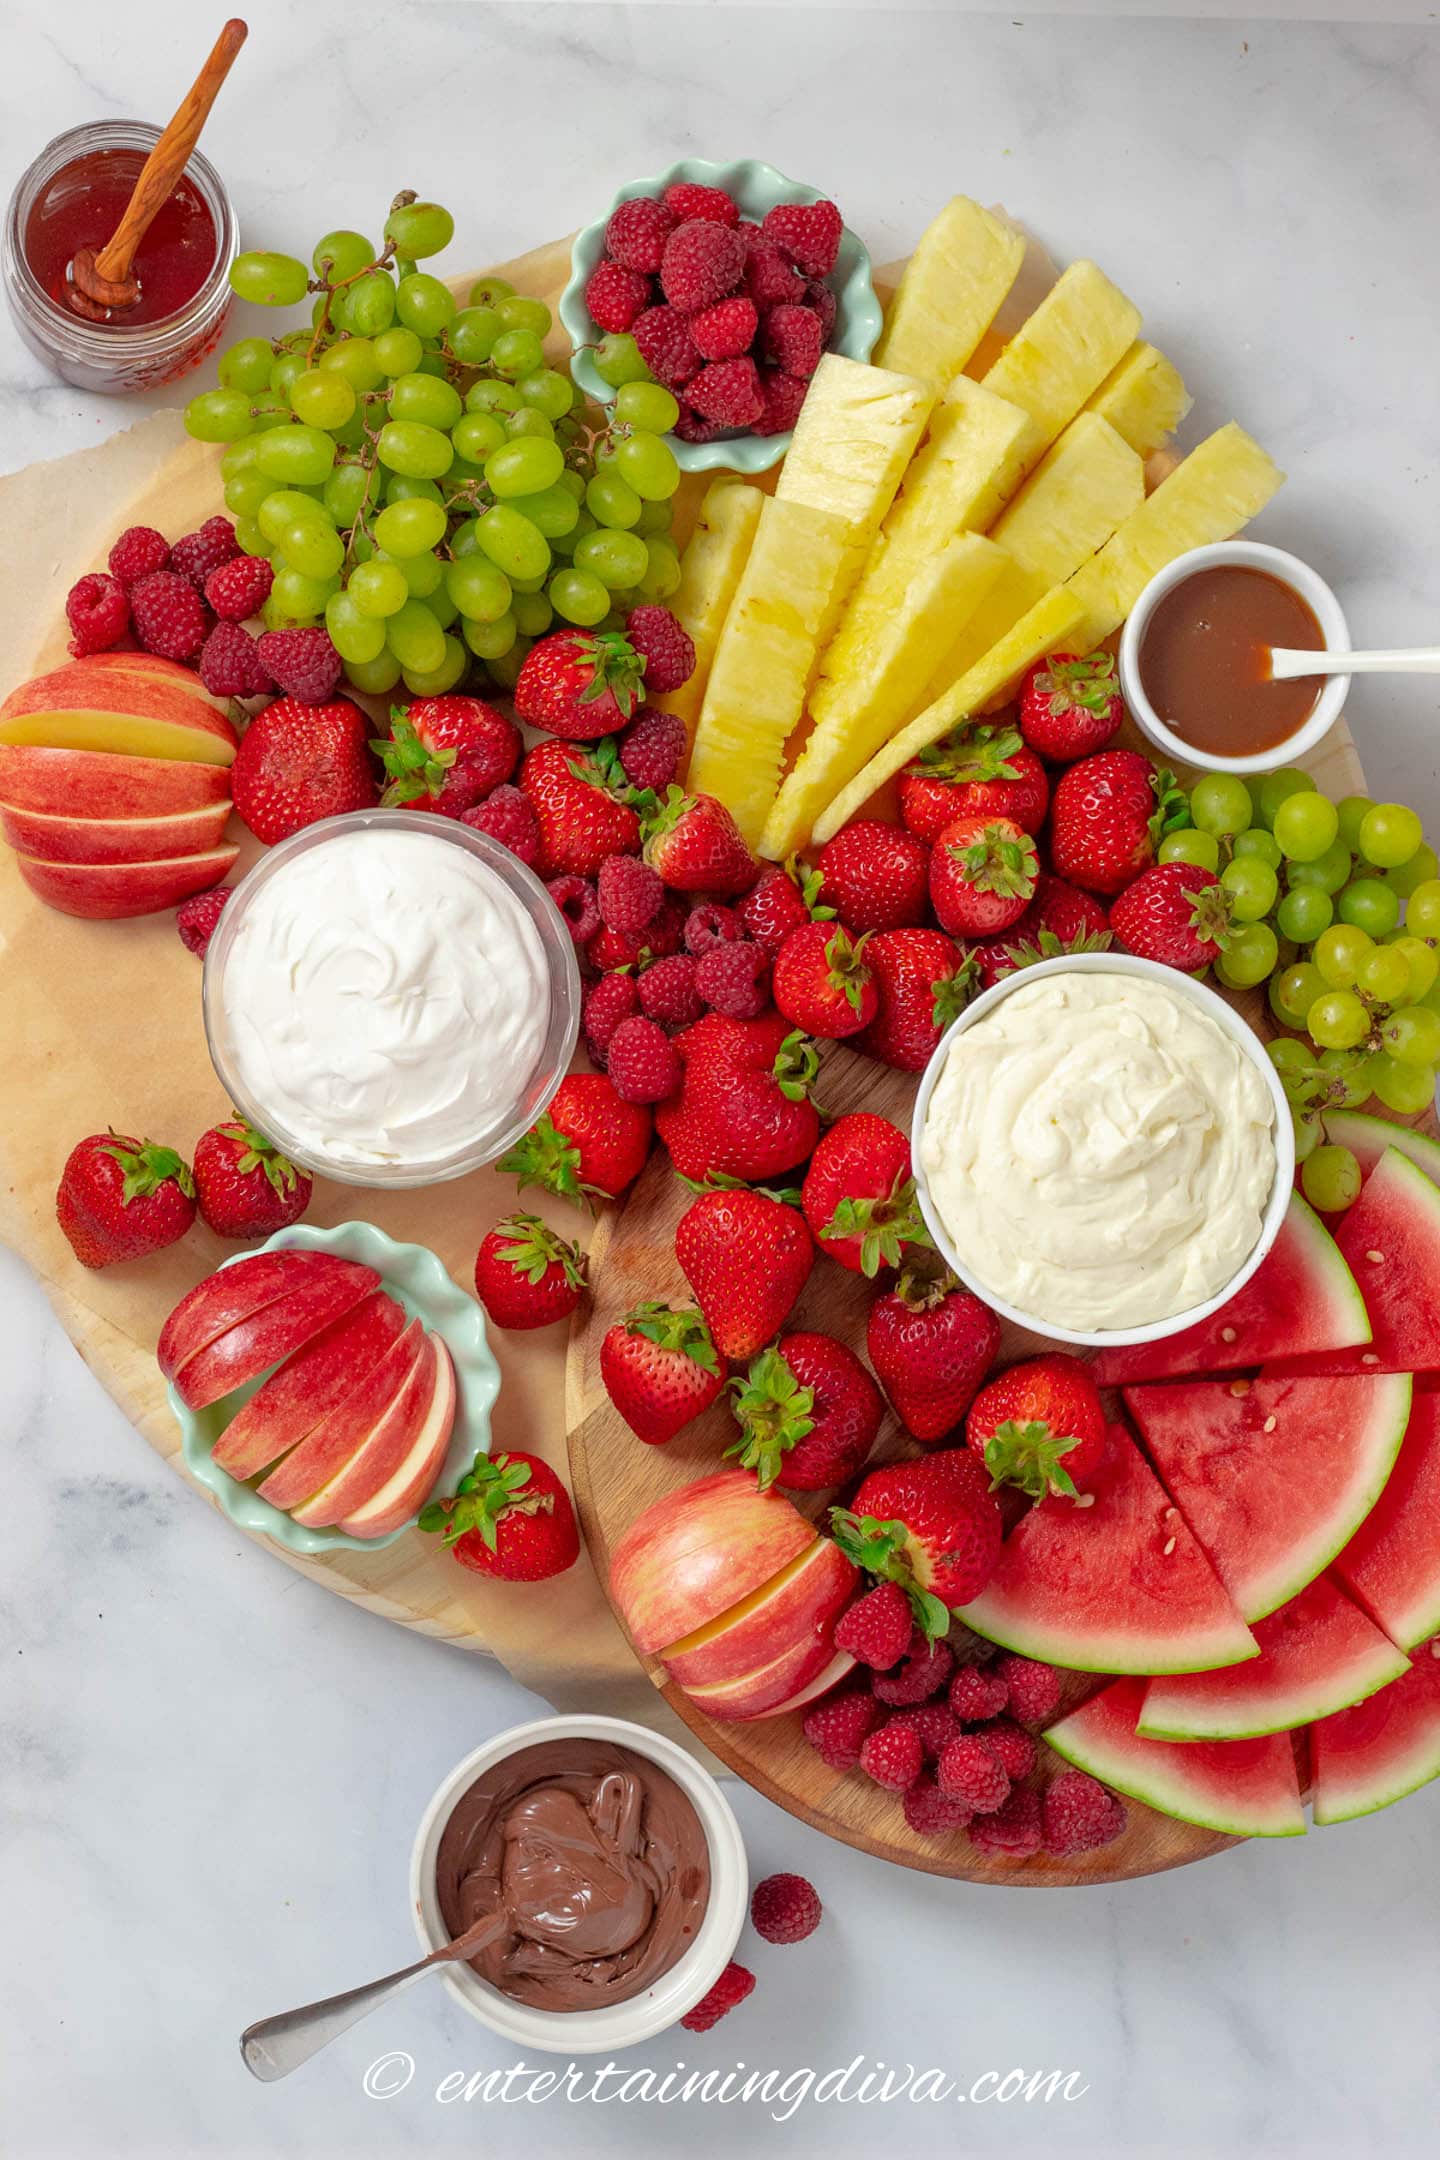 fruit charcuterie board with raspberries, strawberries, apples, pineapple, grapes, watermelon and dips.